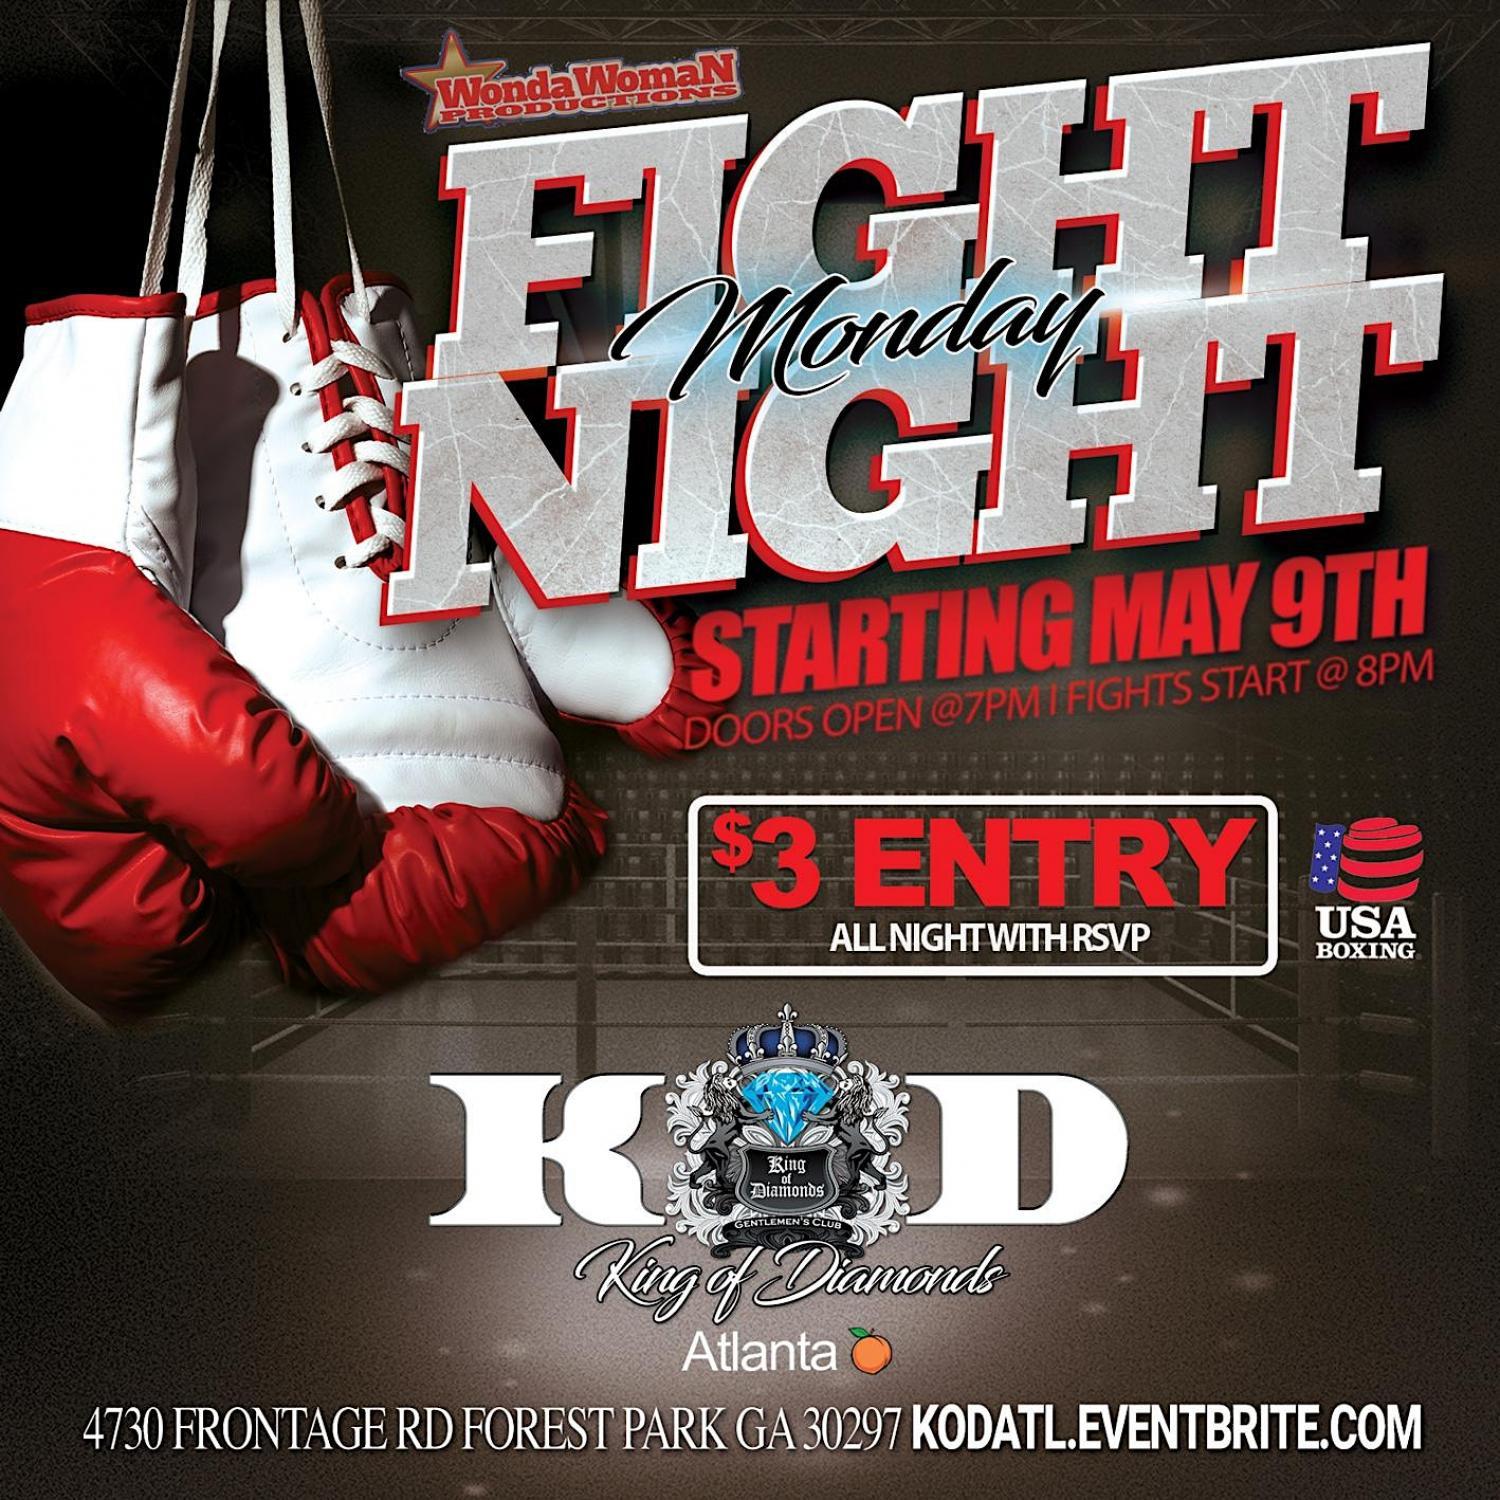 Monday Night Fight Night Live with USAA boxing!
Mon Dec 26, 7:00 PM - Tue Dec 27, 4:00 AM
in 70 days